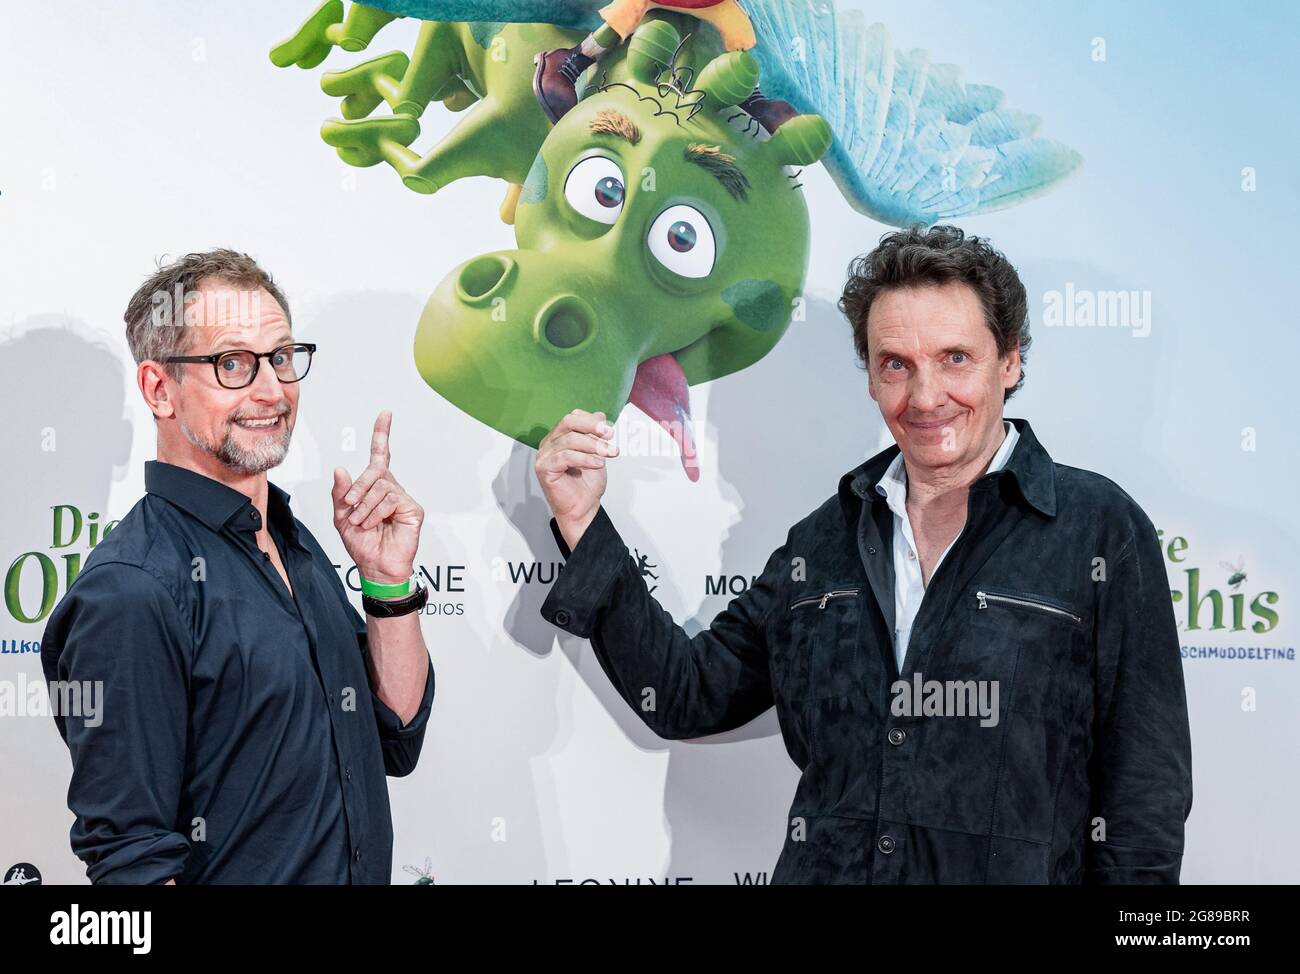 Hamburg, Germany. 18th July, 2021. Director Jens Møller (l) stands on the red carpet with author Erhard Dietl at the German premiere of the film 'Die Olchis - Willkommen in Schmuddelfing'. Credit: Markus Scholz/dpa/Alamy Live News Stock Photo